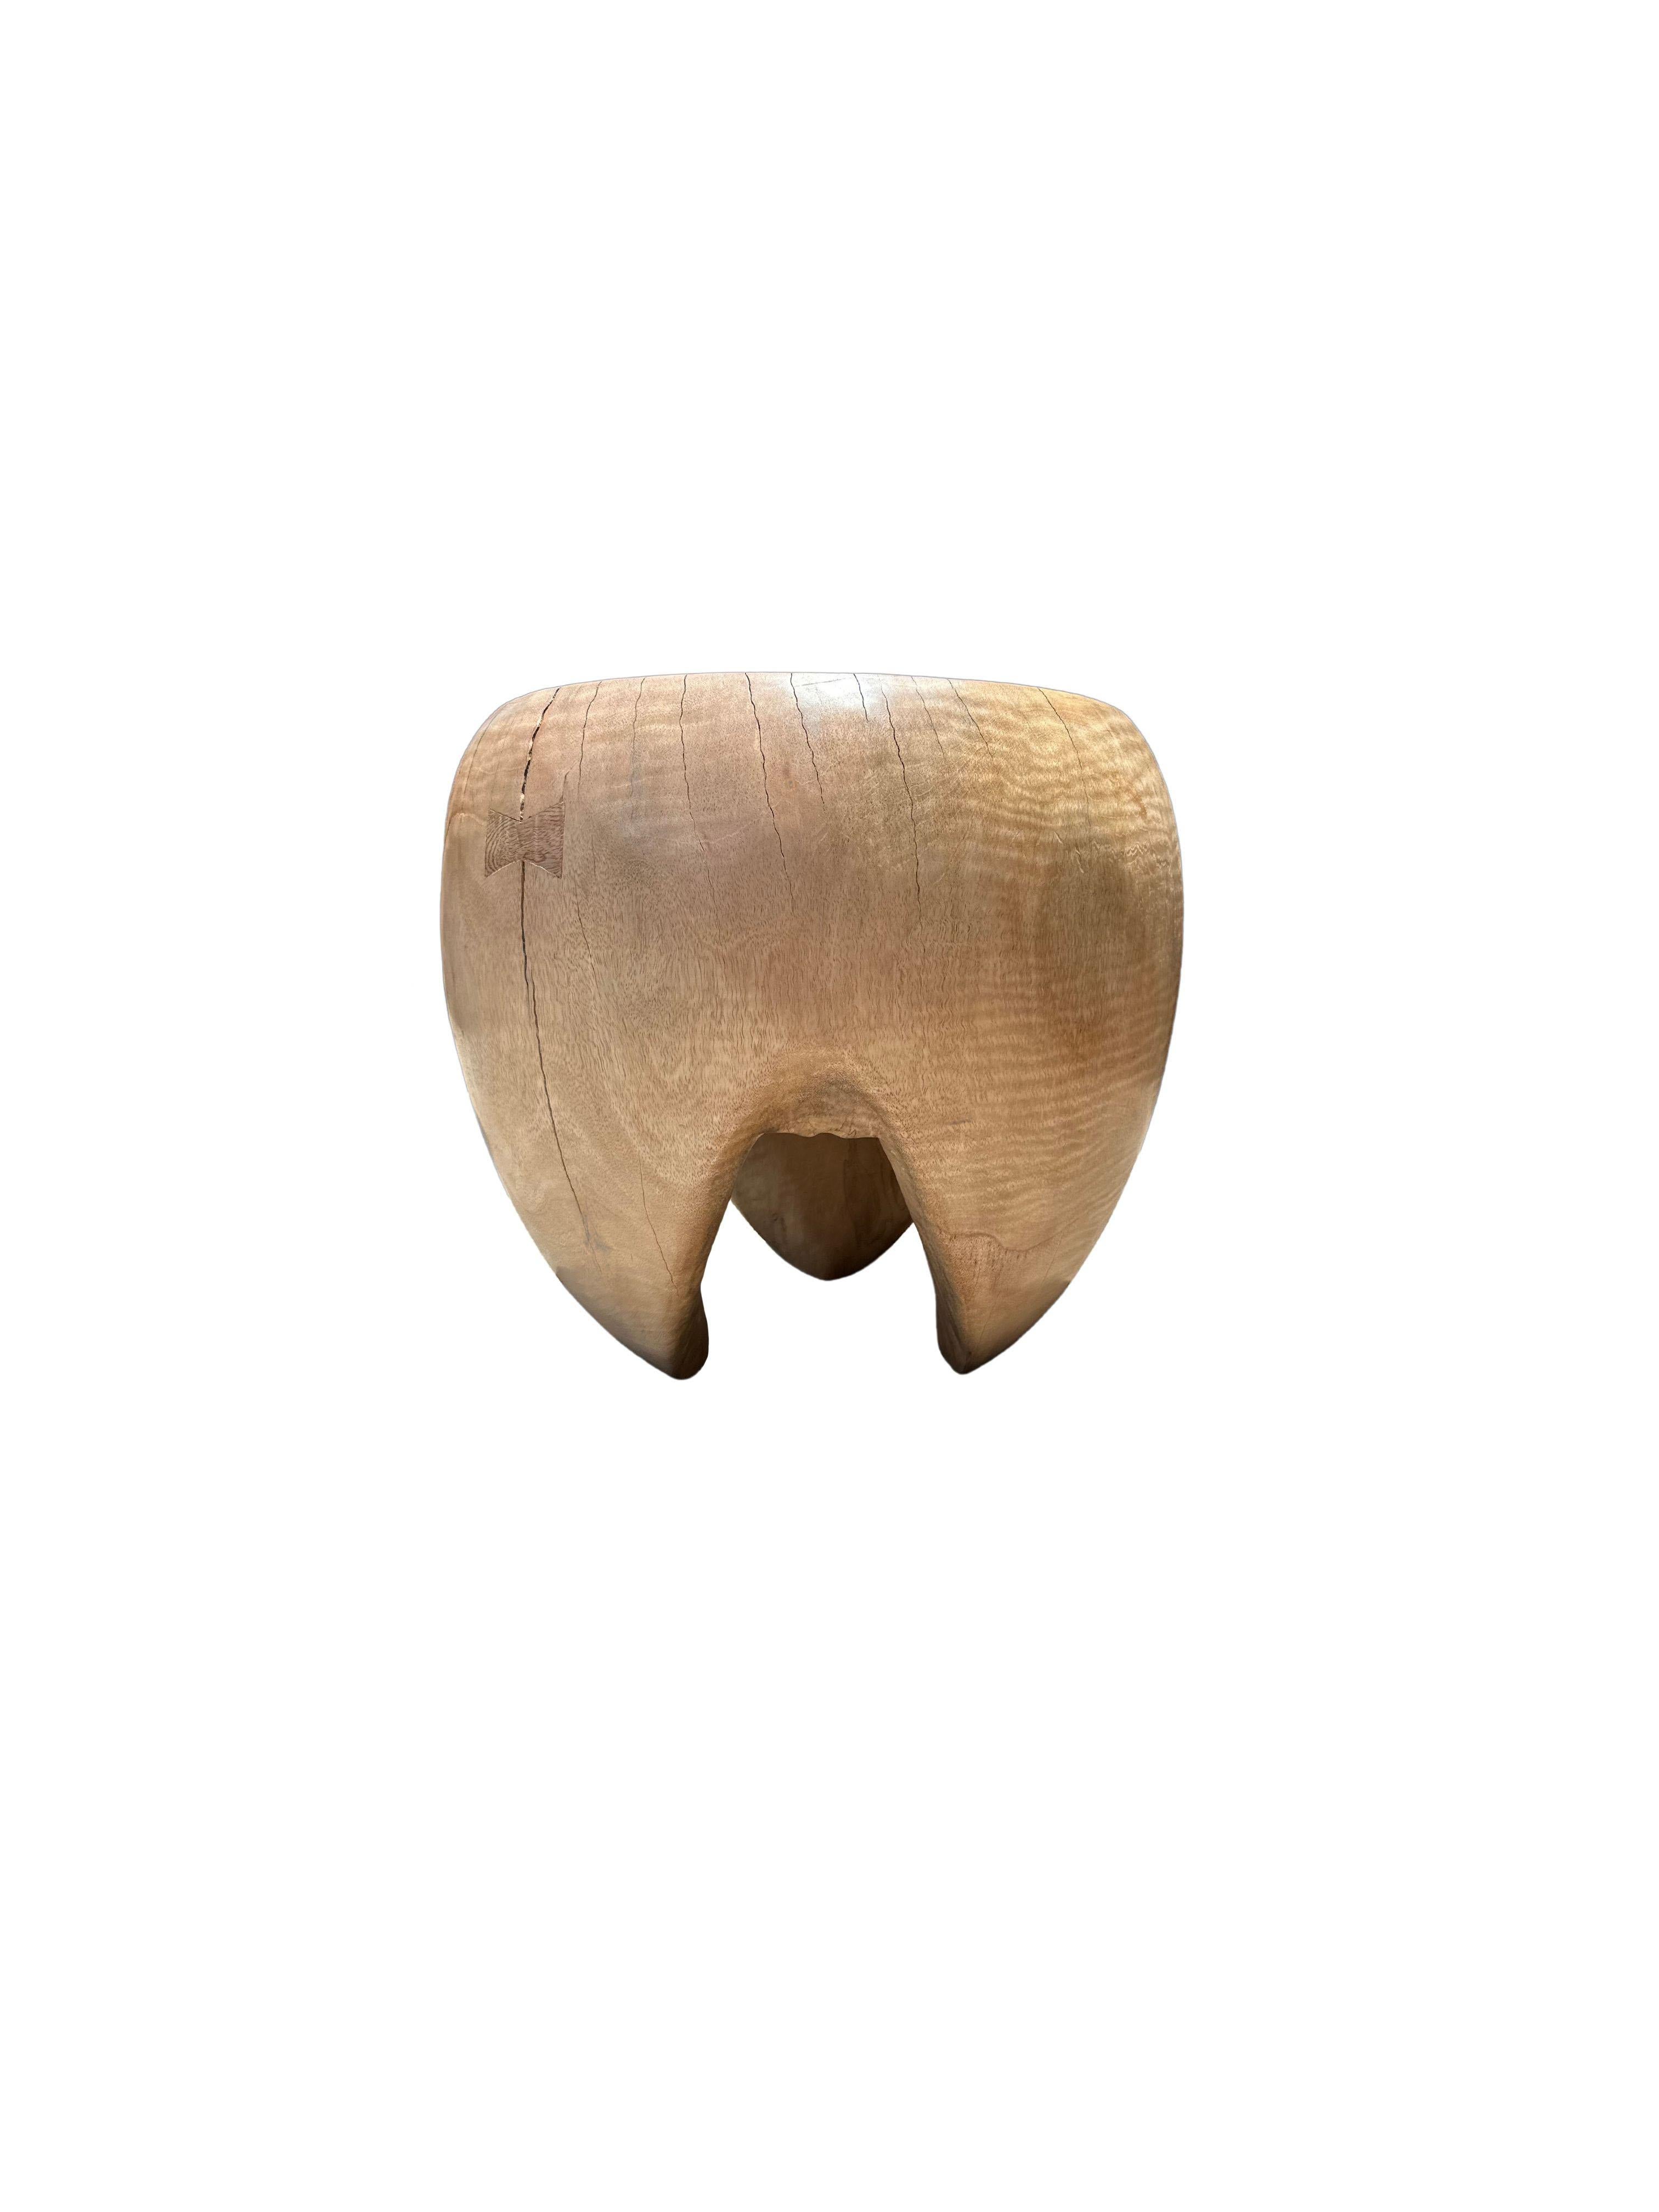 Indonesian Sculptural Mango Wood Side Table, Hand-Crafted Modern Organic